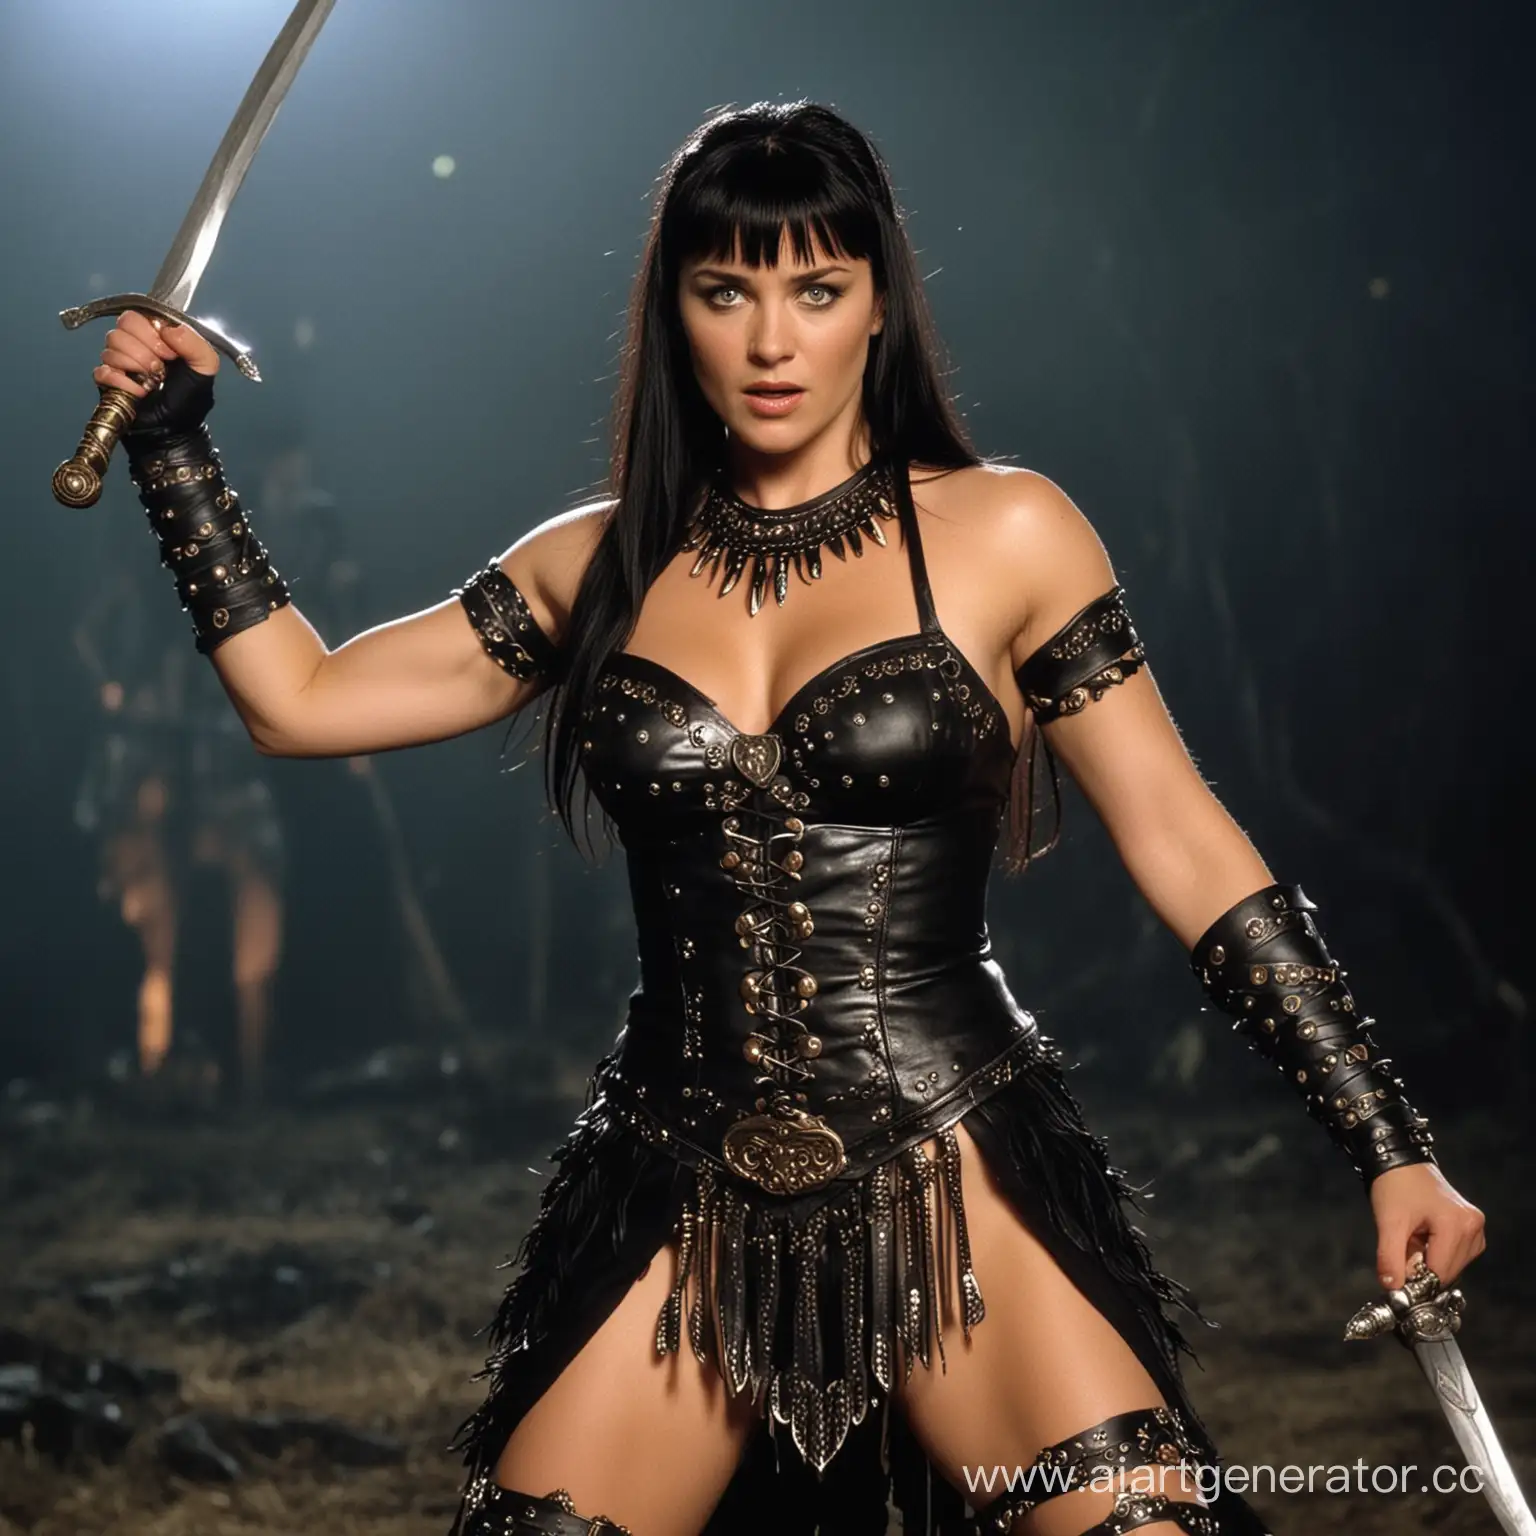 She is not a volatile servant, “I am a Marrana in a deafening cunning act.” Scary dancing, Xena Warrior Princess at night.